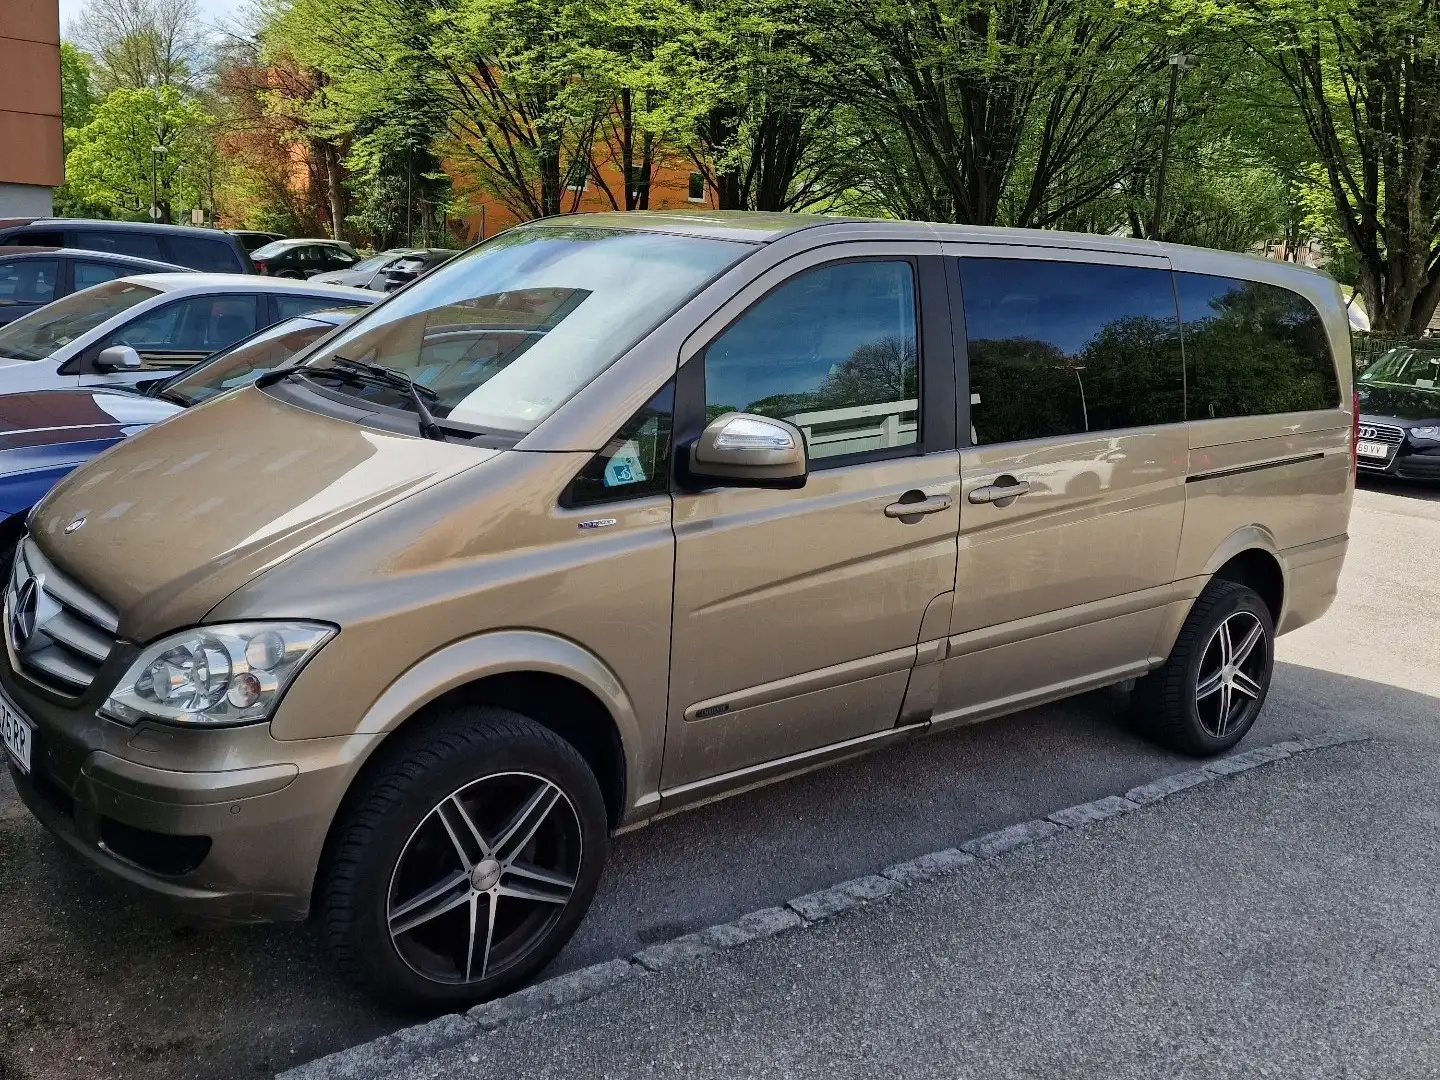 Mercedes-Benz Viano Ambiente extralang 2,2 CDI BlueEff. DPF 4MATIC Aut Or - 1